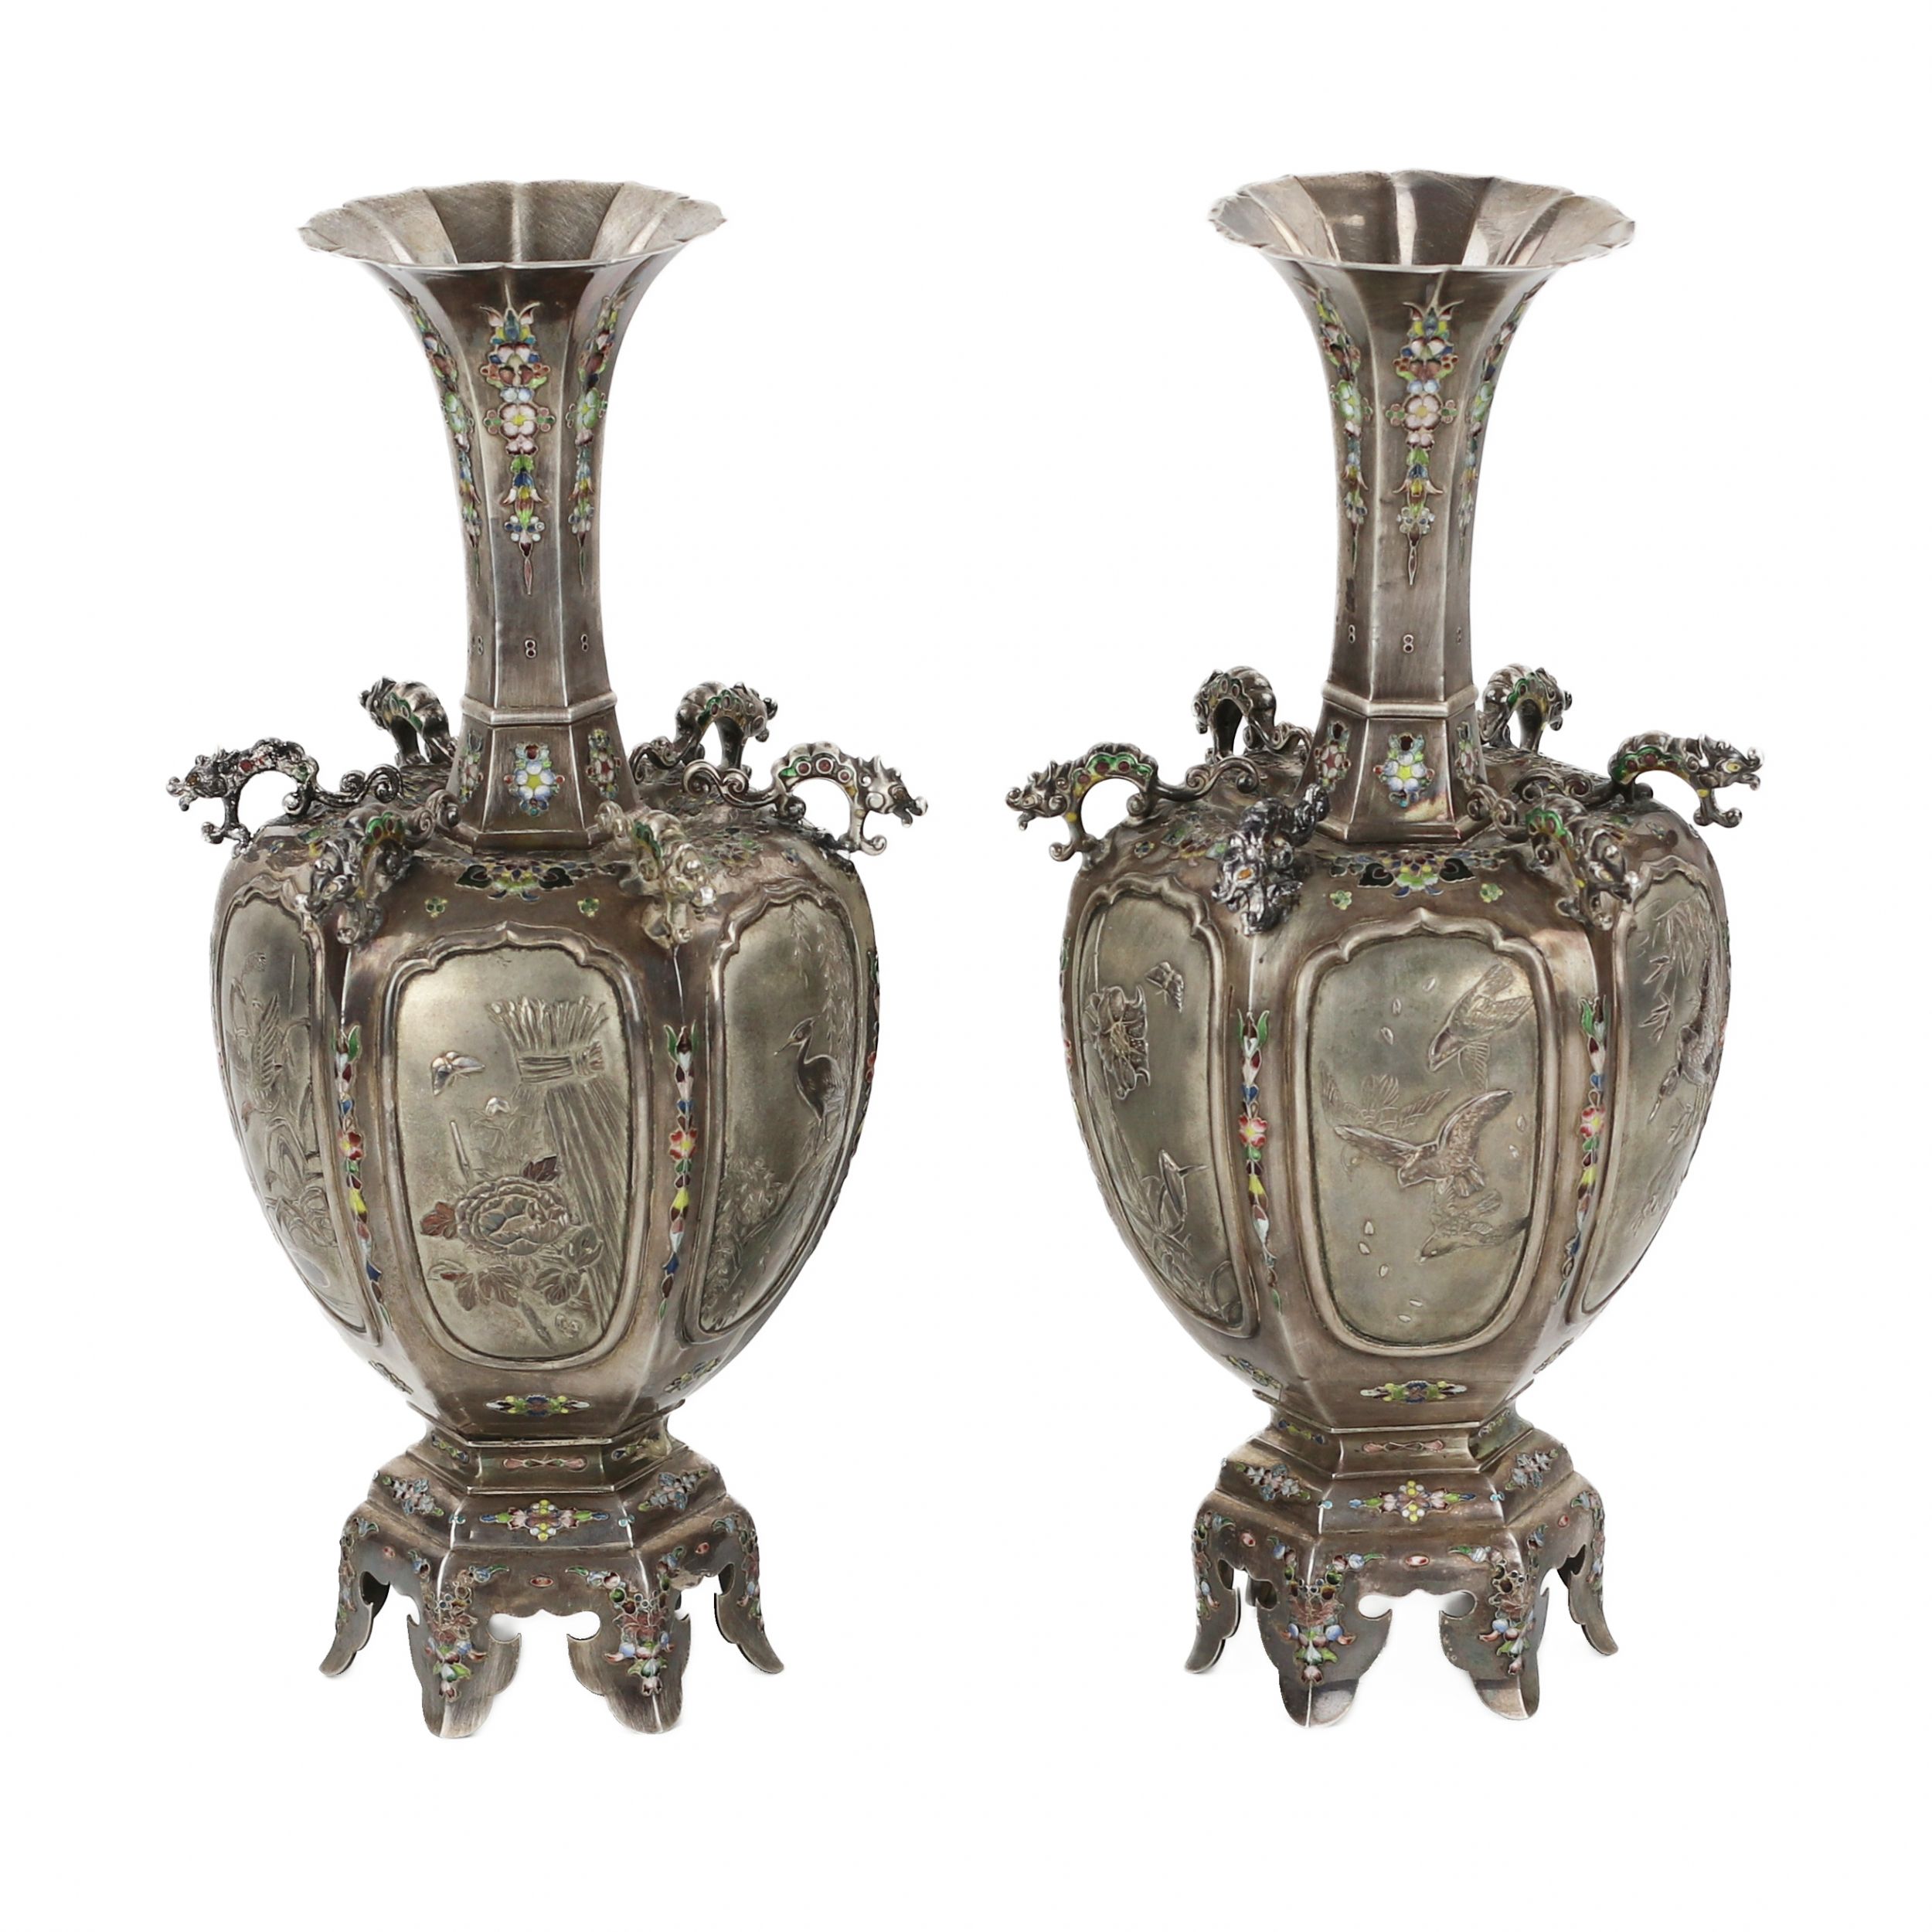 A pair of elegant Japanese vases made of silver and enamel. The turn of the 19th-20th centuries. - Image 3 of 6